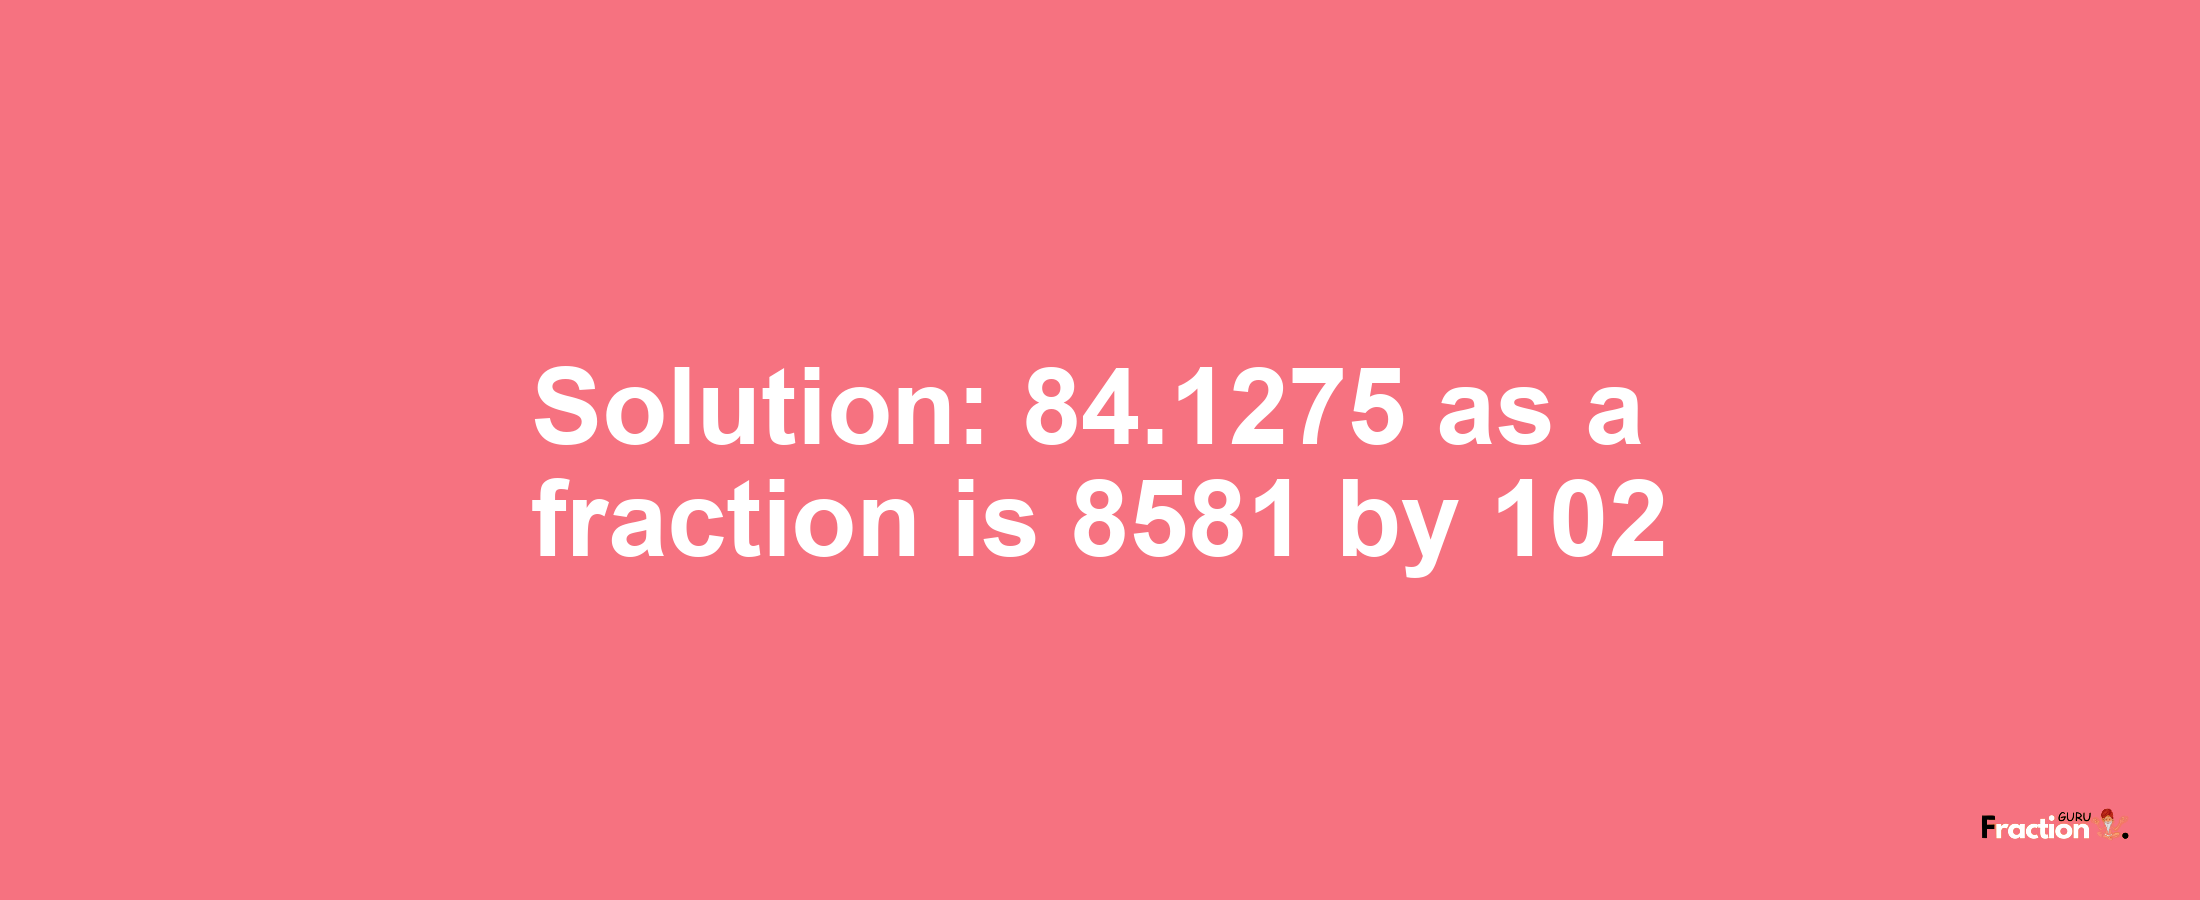 Solution:84.1275 as a fraction is 8581/102